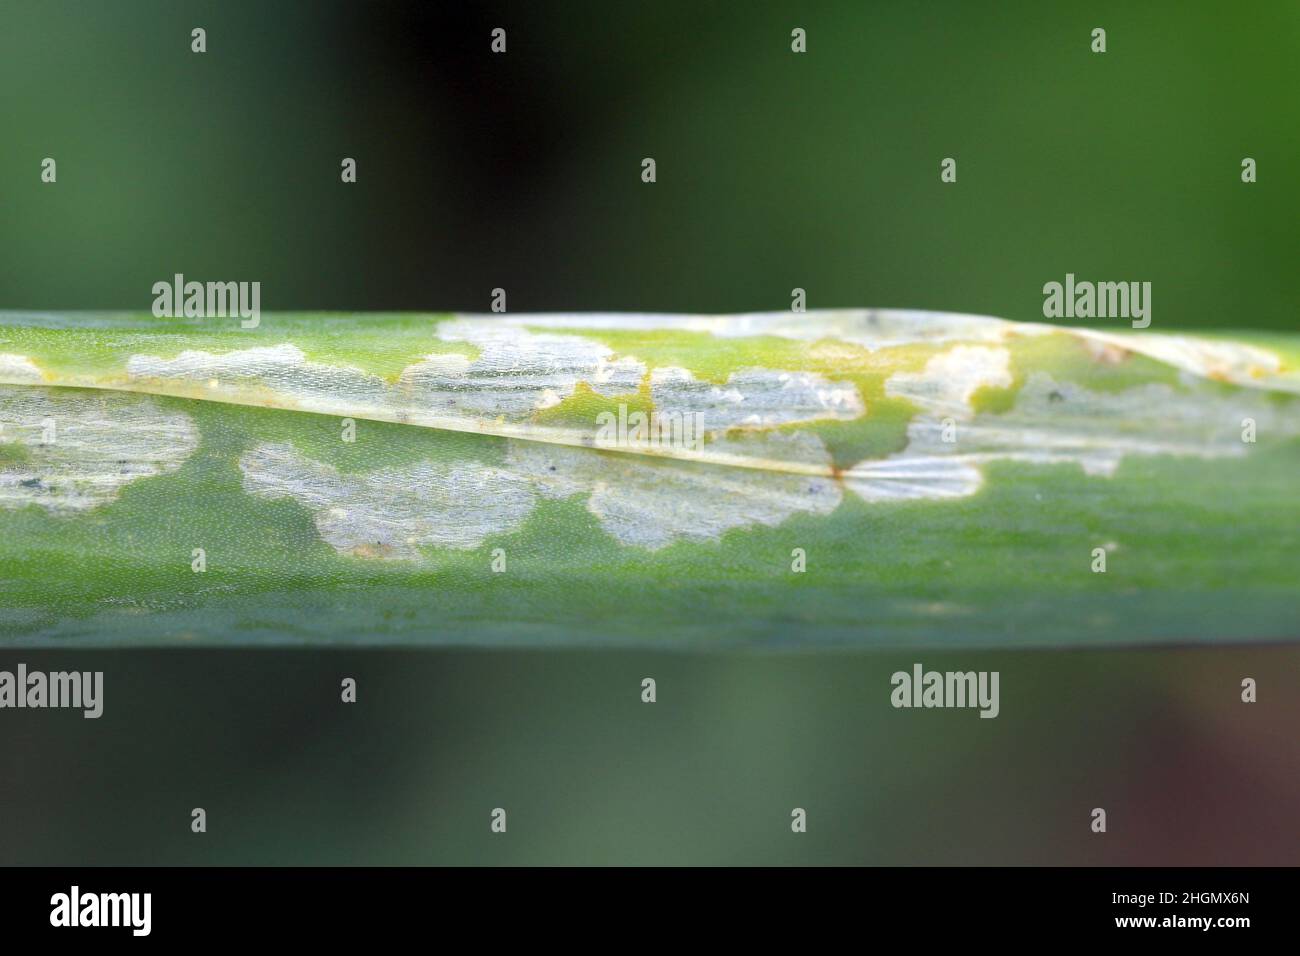 Onion leaves damaged by leek moth or onion leaf miner (Acrolepiopsis, Acrolepia assectella) family Acrolepiidae. Stock Photo